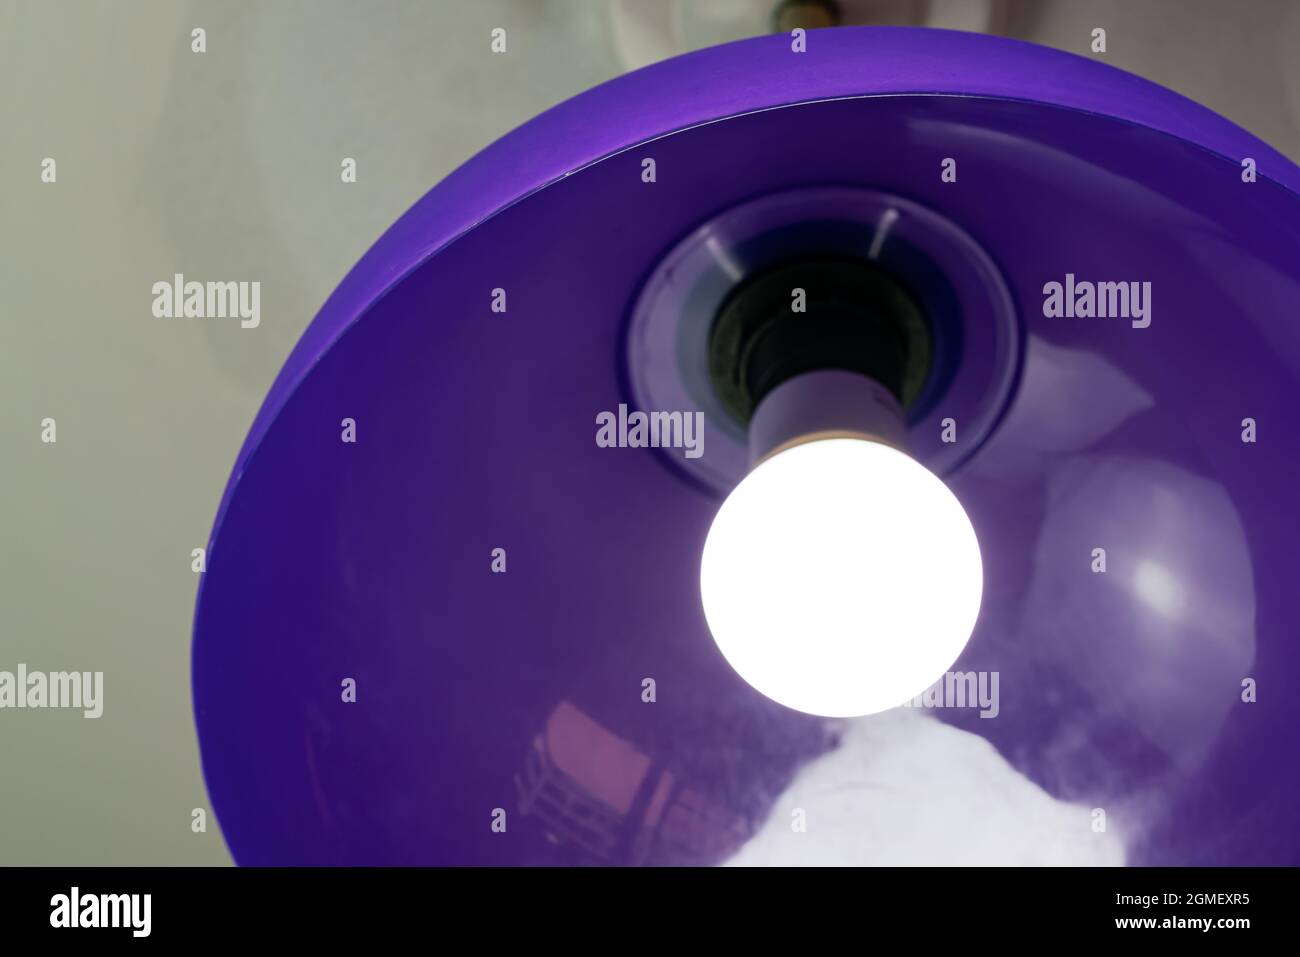 Lighting light bulb in purple plastic pendant at the ceiling in the room. Stock Photo